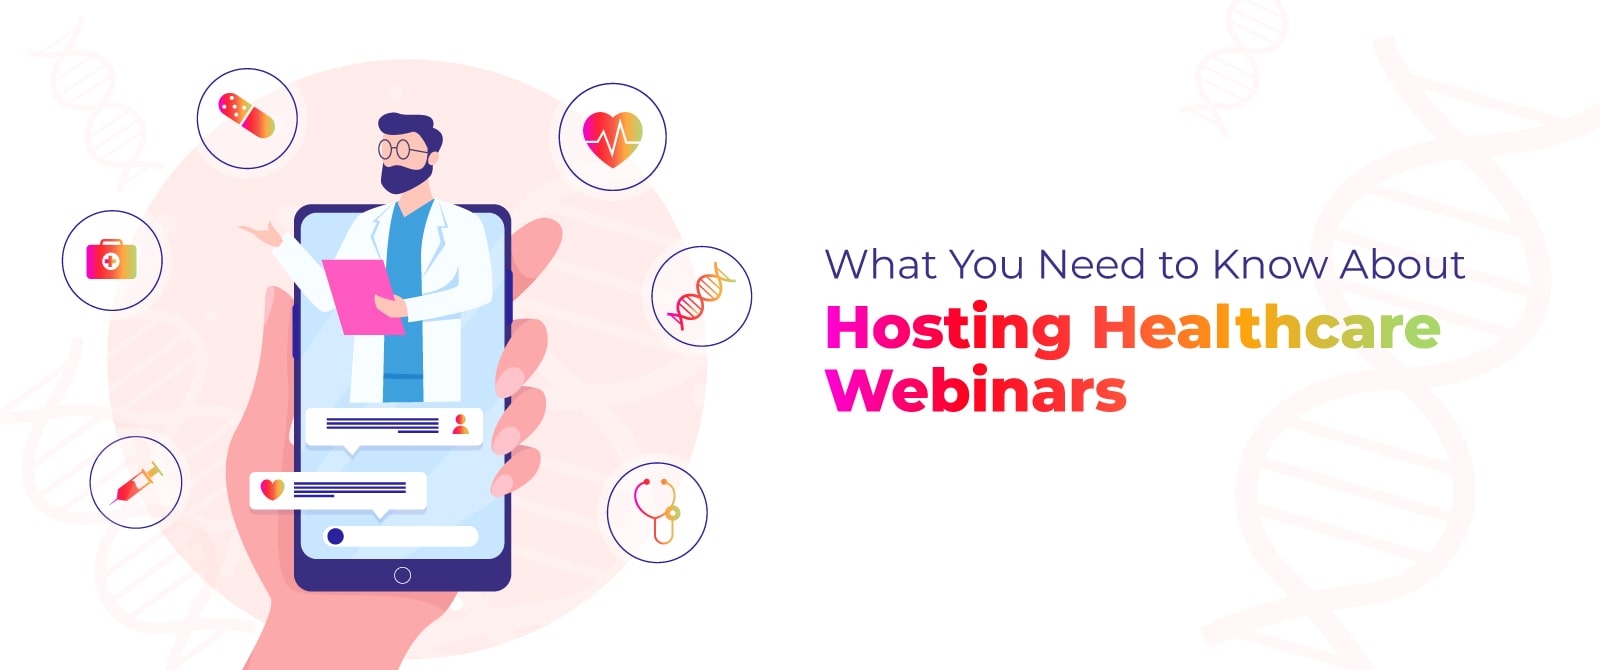 6 Reasons Why To Use Healthcare Webinars (& How to Host Them)